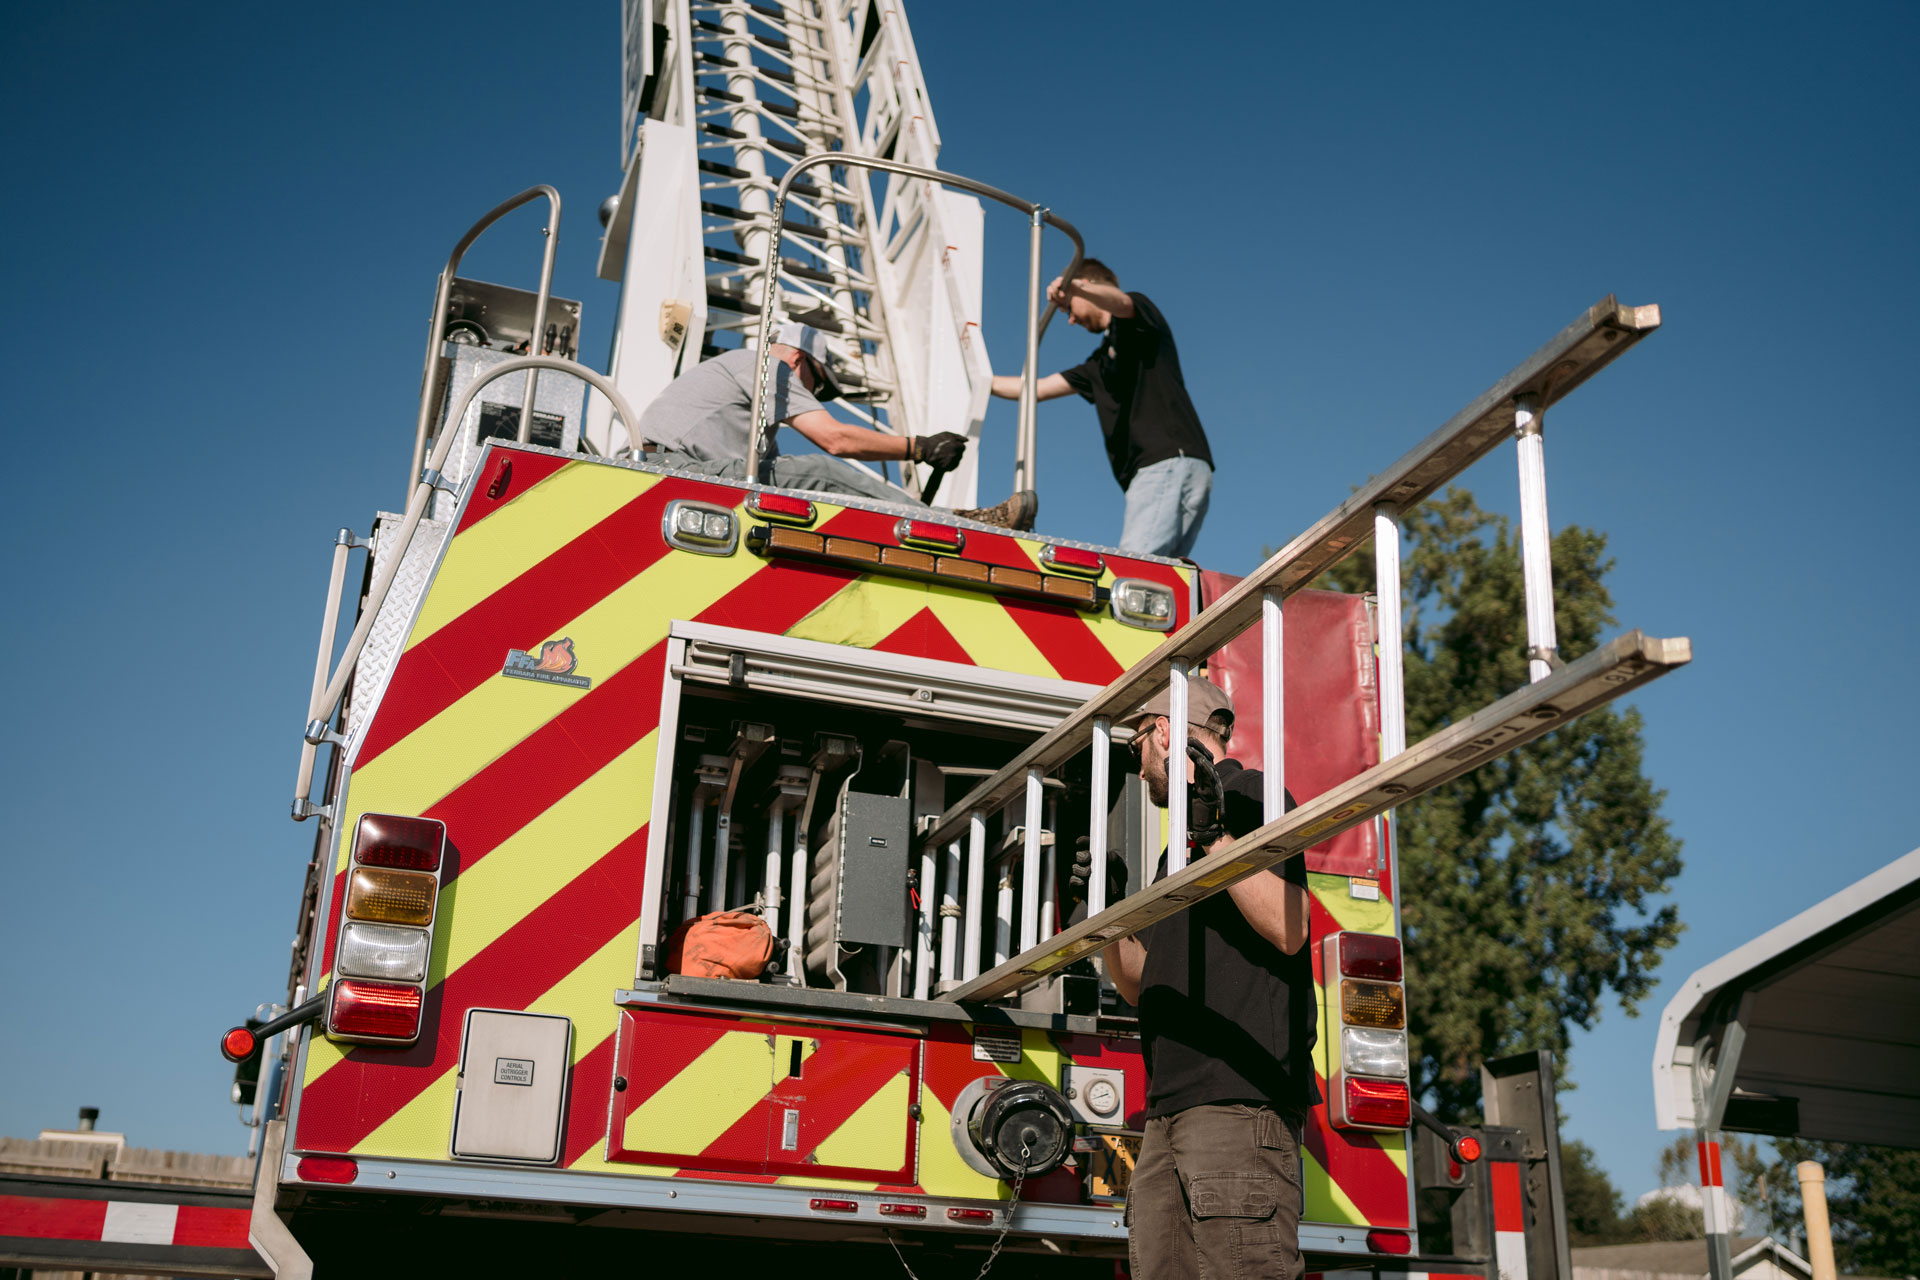 removing a fire truck ladder for testing